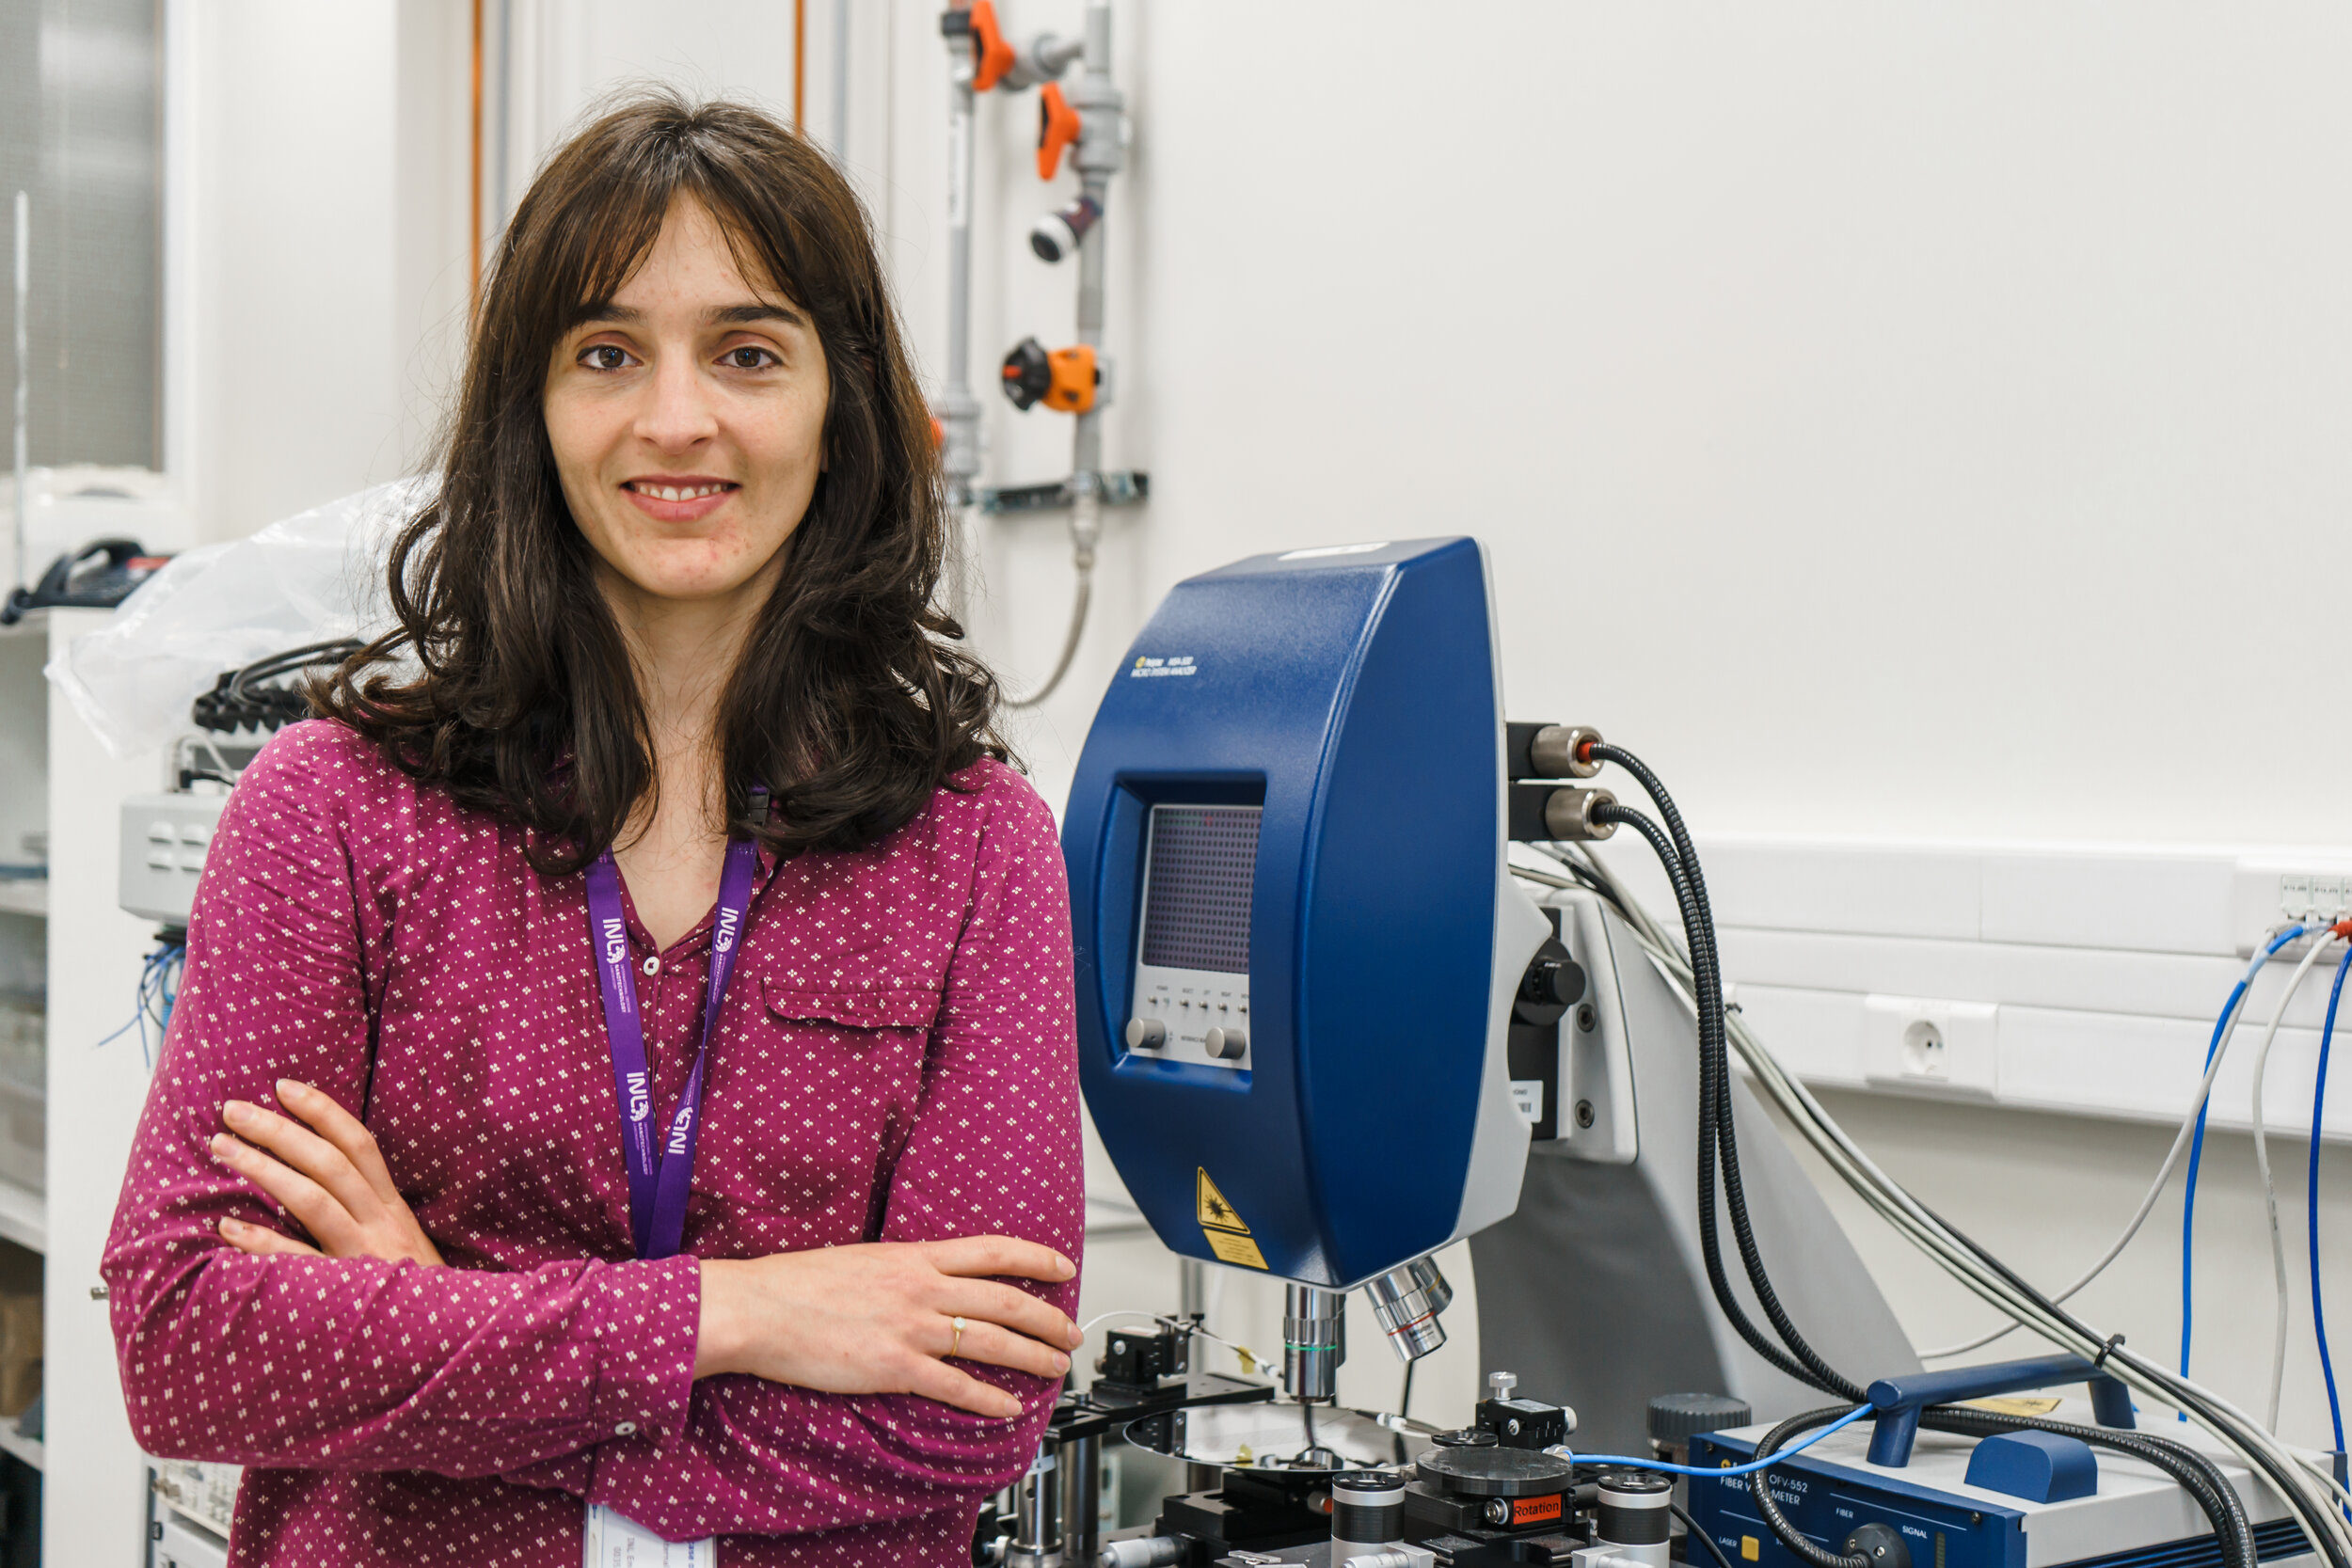 Celebrating WOMEN IN SCIENCE: Interview with Rosana Dias